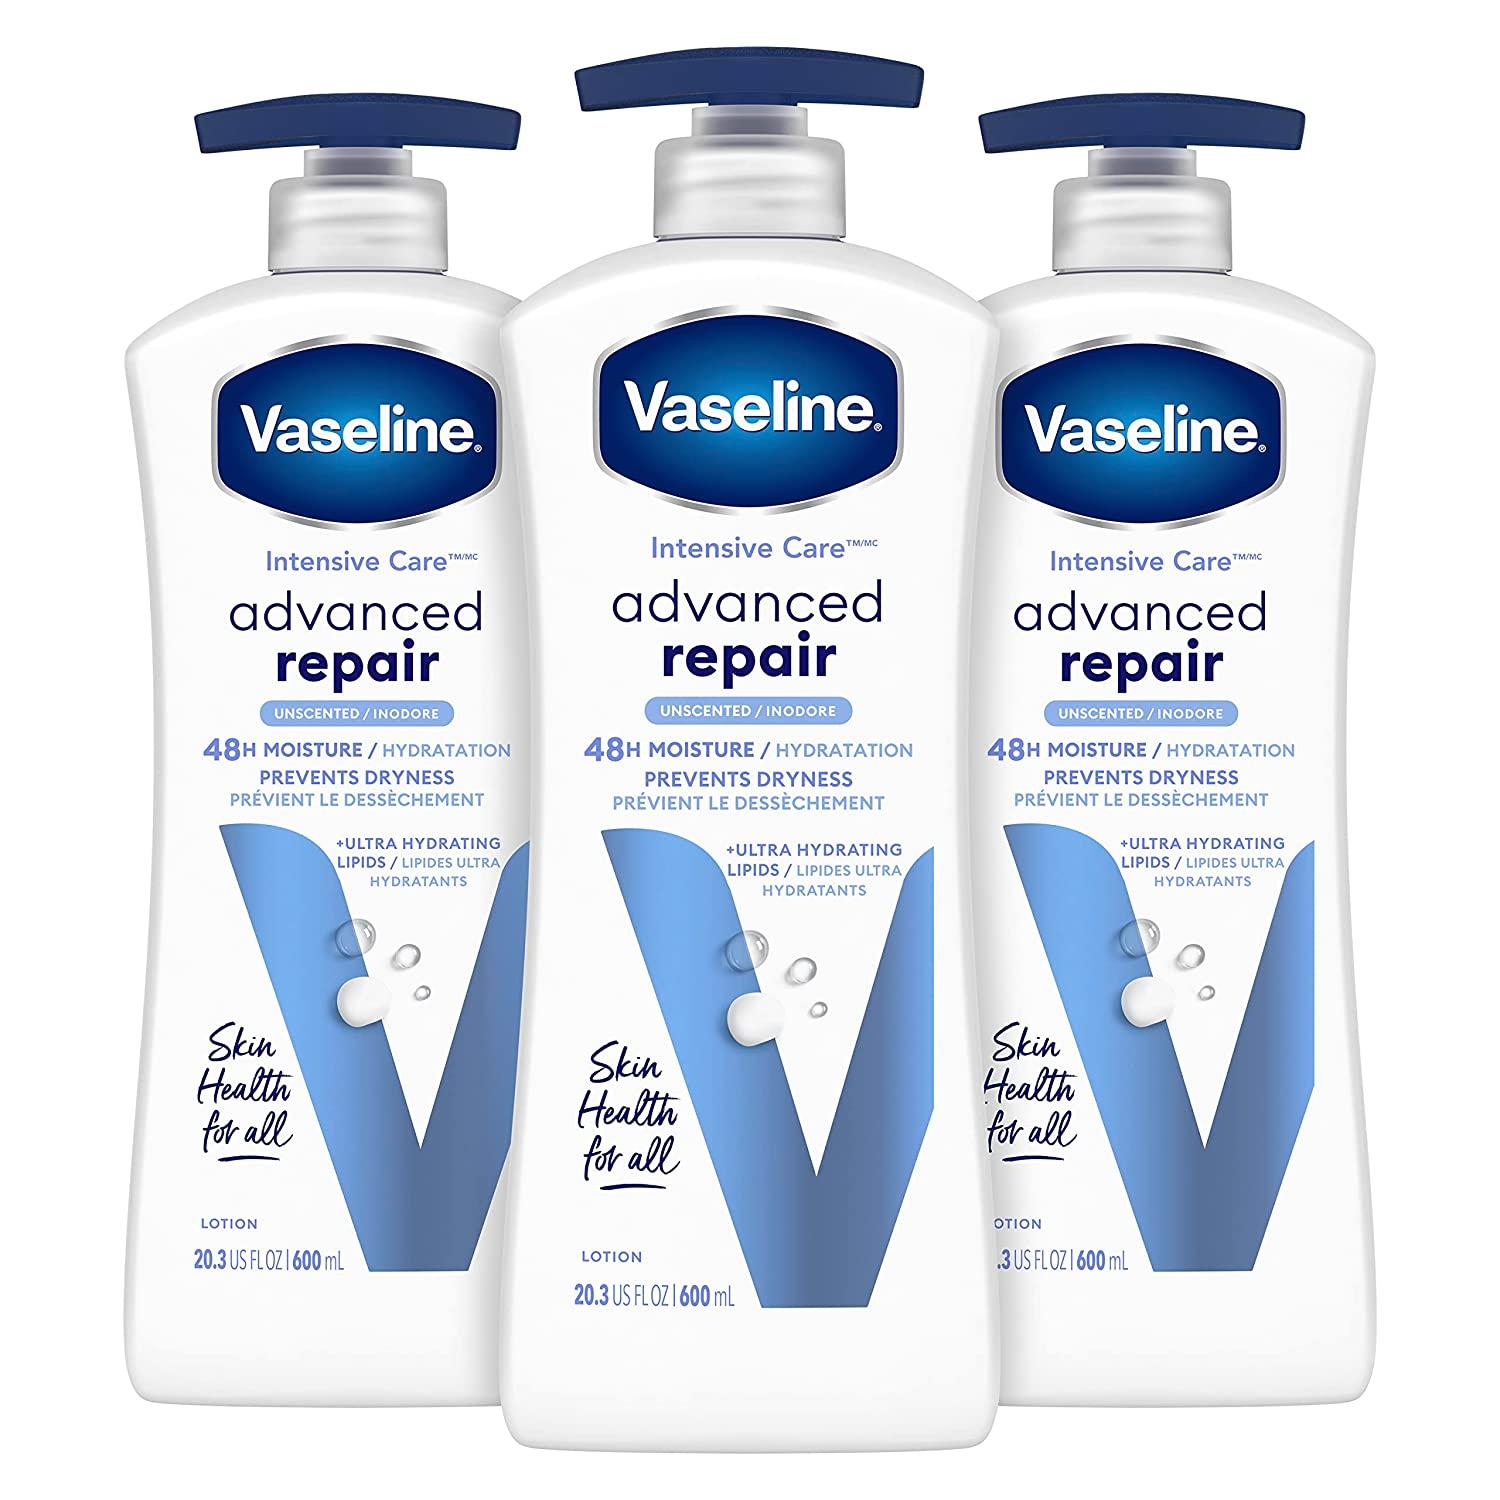 Vaseline Intensive Care Advanced Repair Body Lotions 3 Pack for $12.15 Shipped